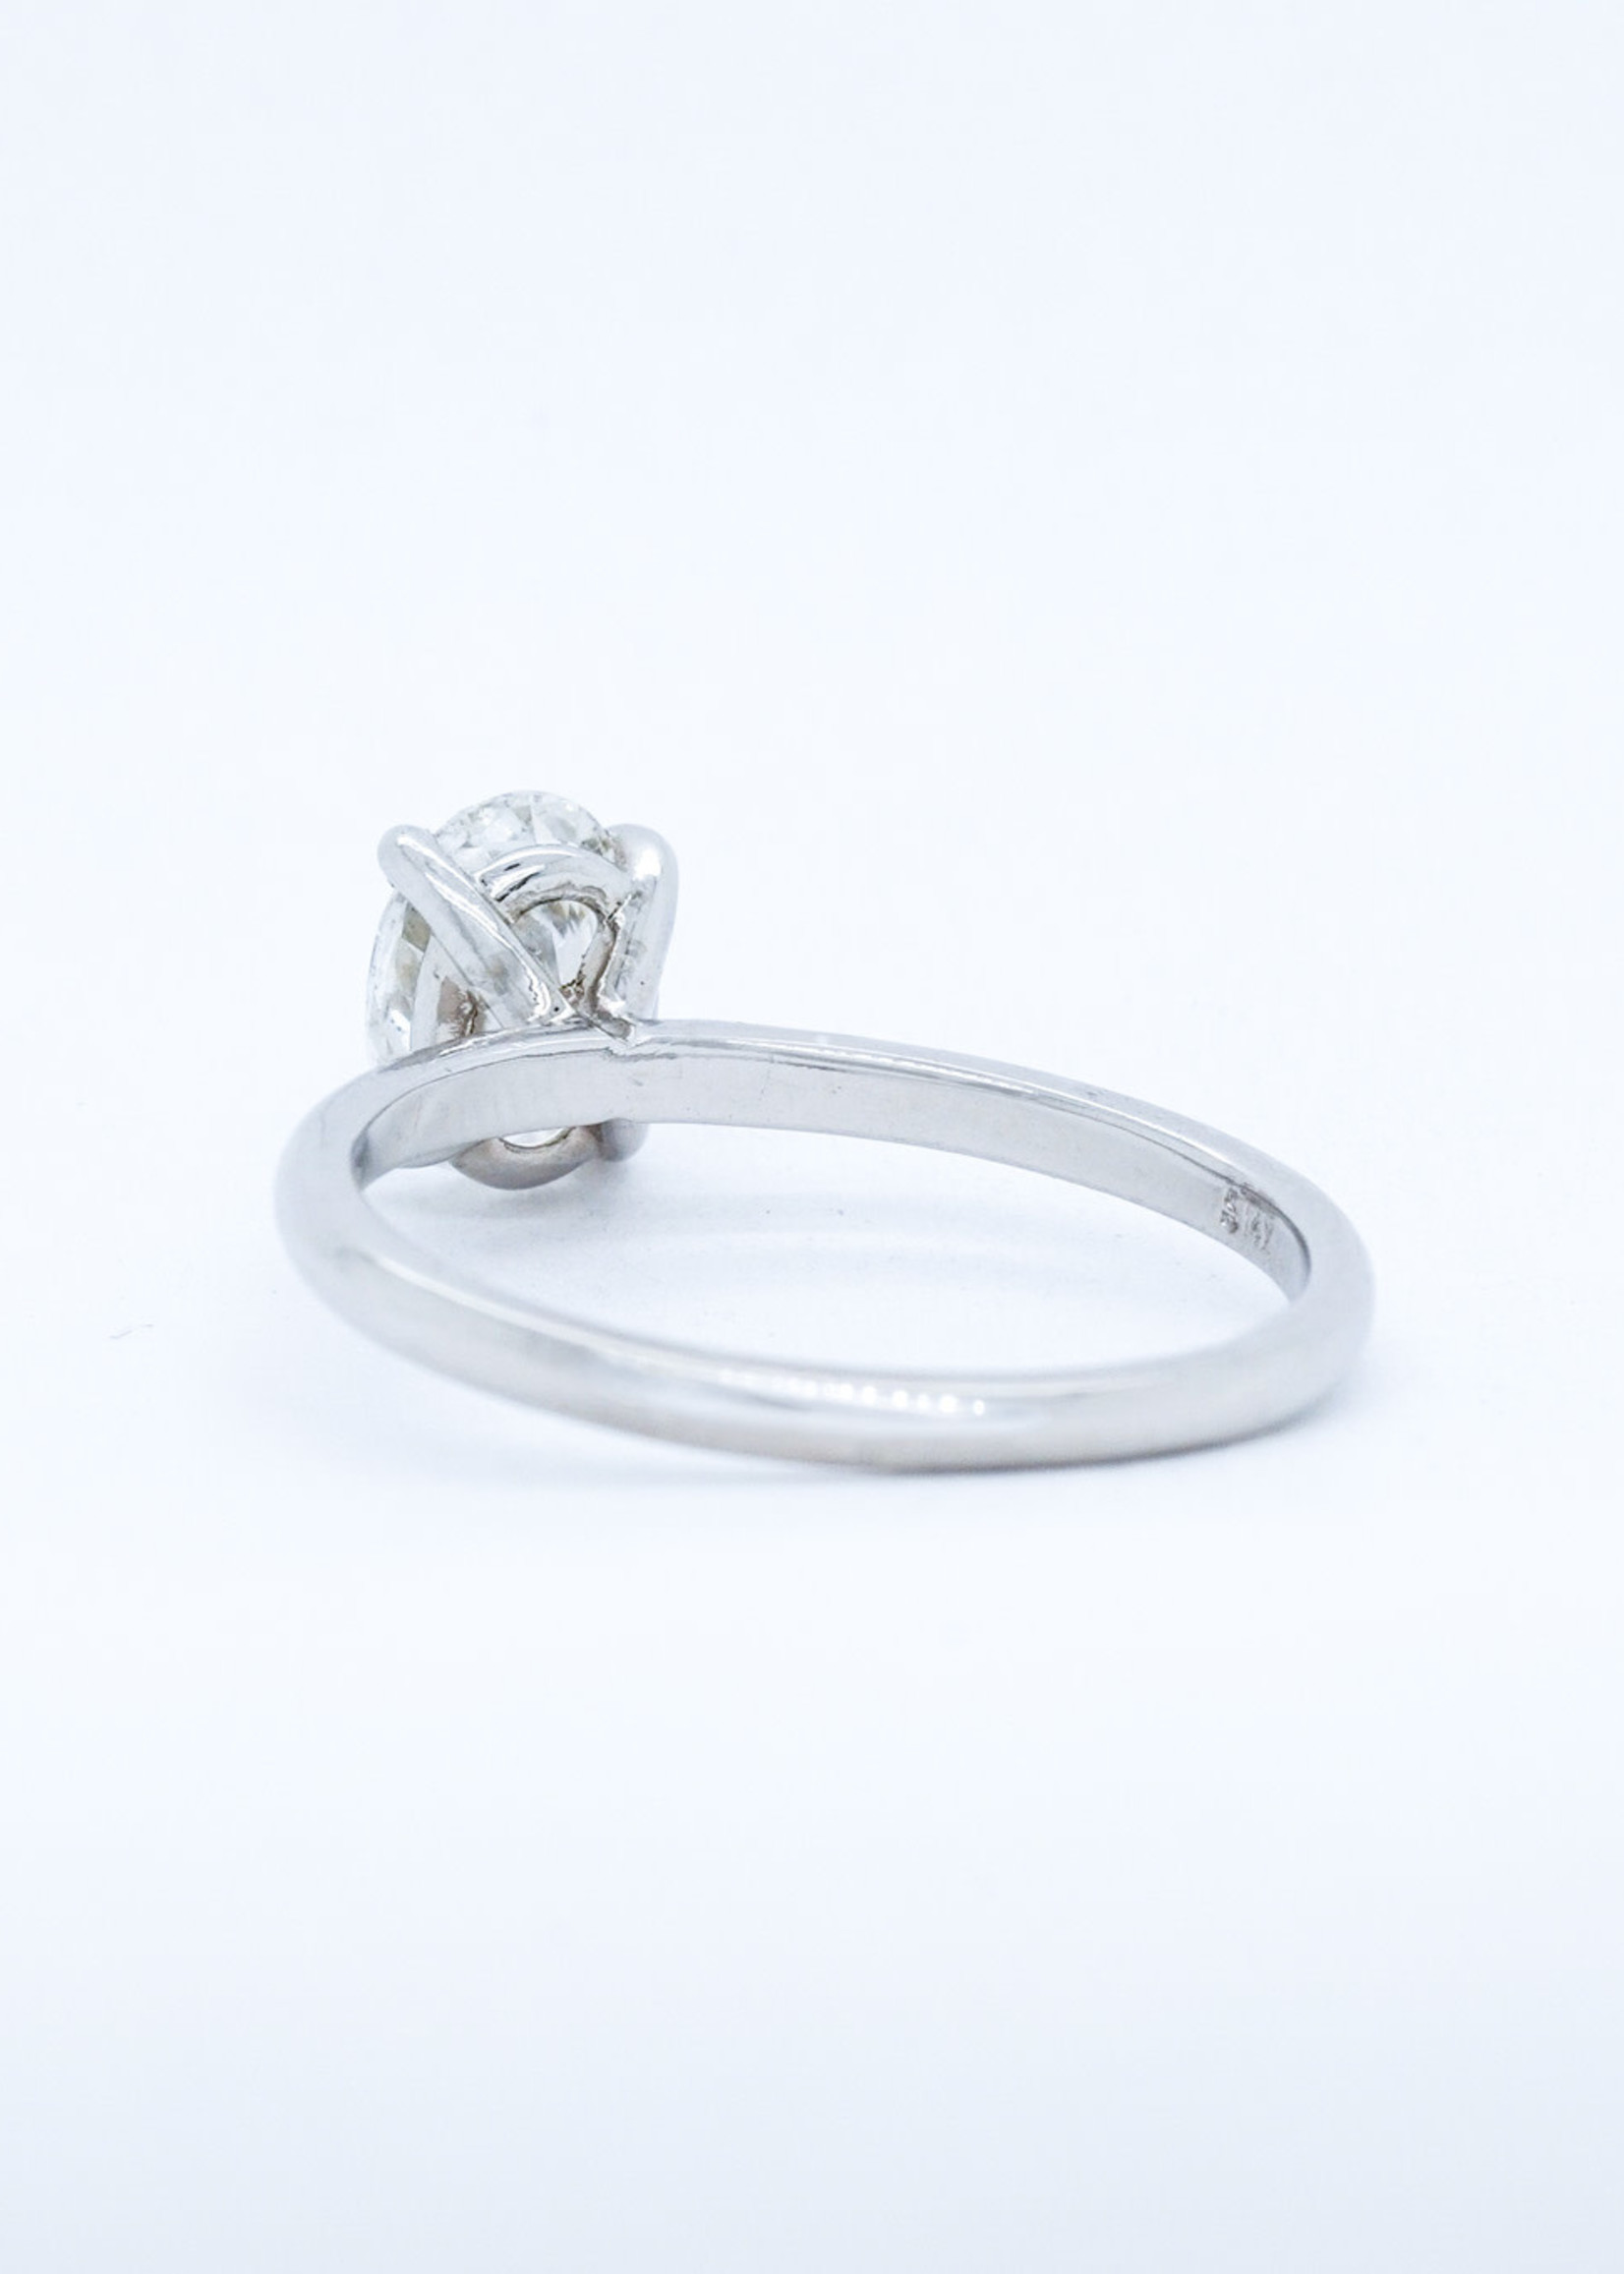 14KW 2.30g .96ct G/SI2 GIA Oval Diamond Solitaire Ring (size 7)